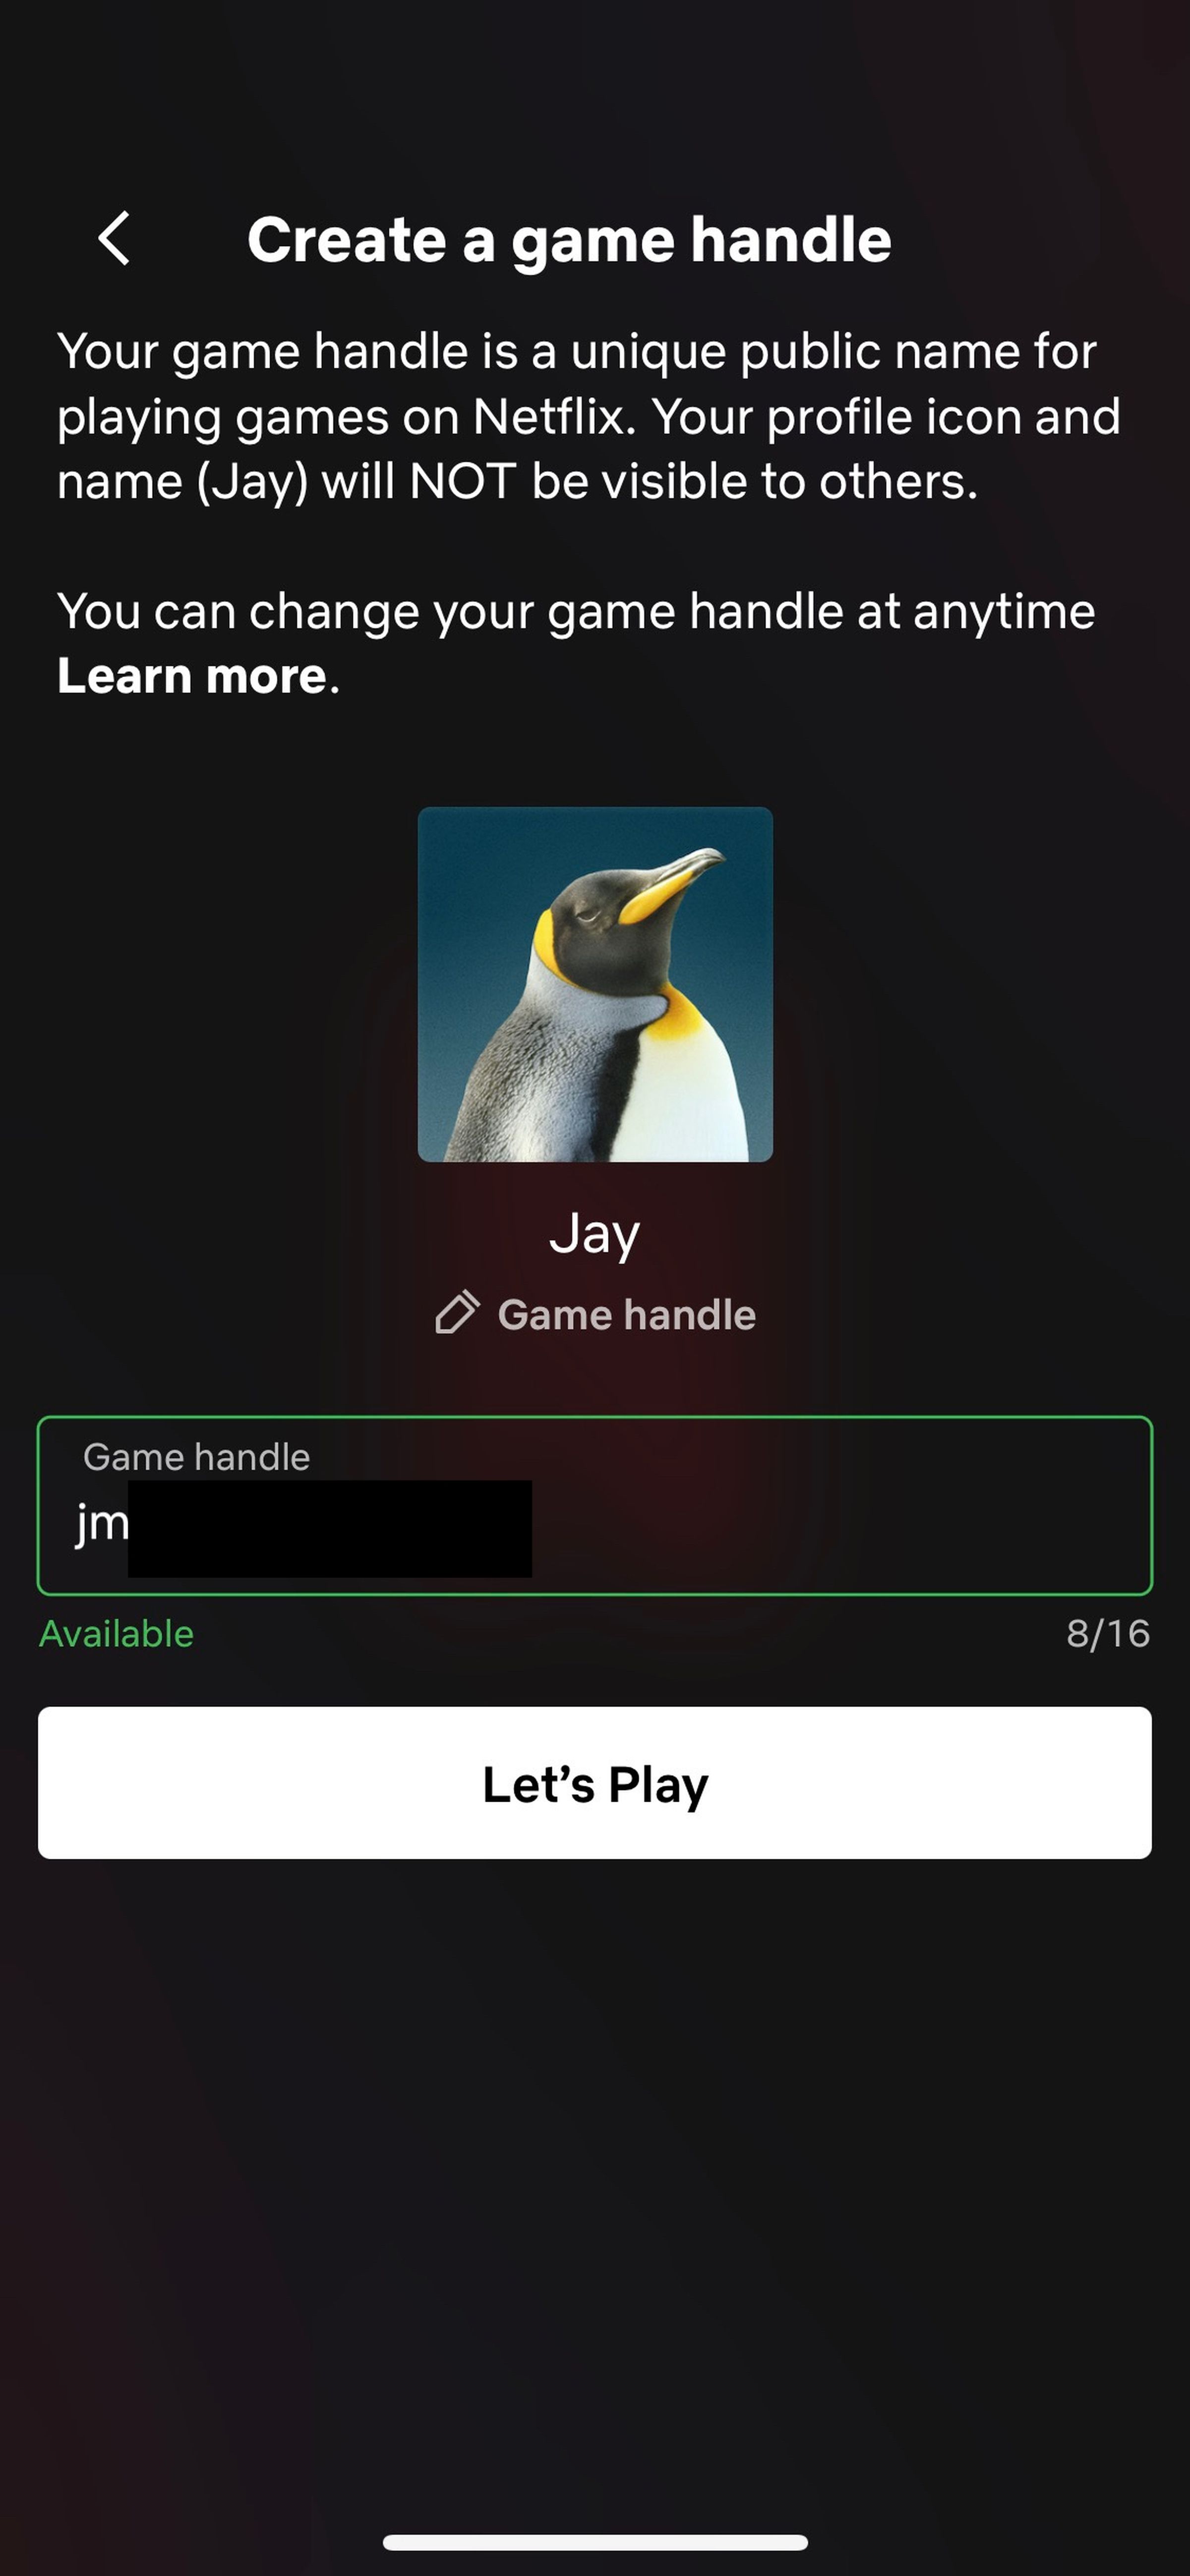 A screenshot from the Netflix app showing how to set up your game handle.